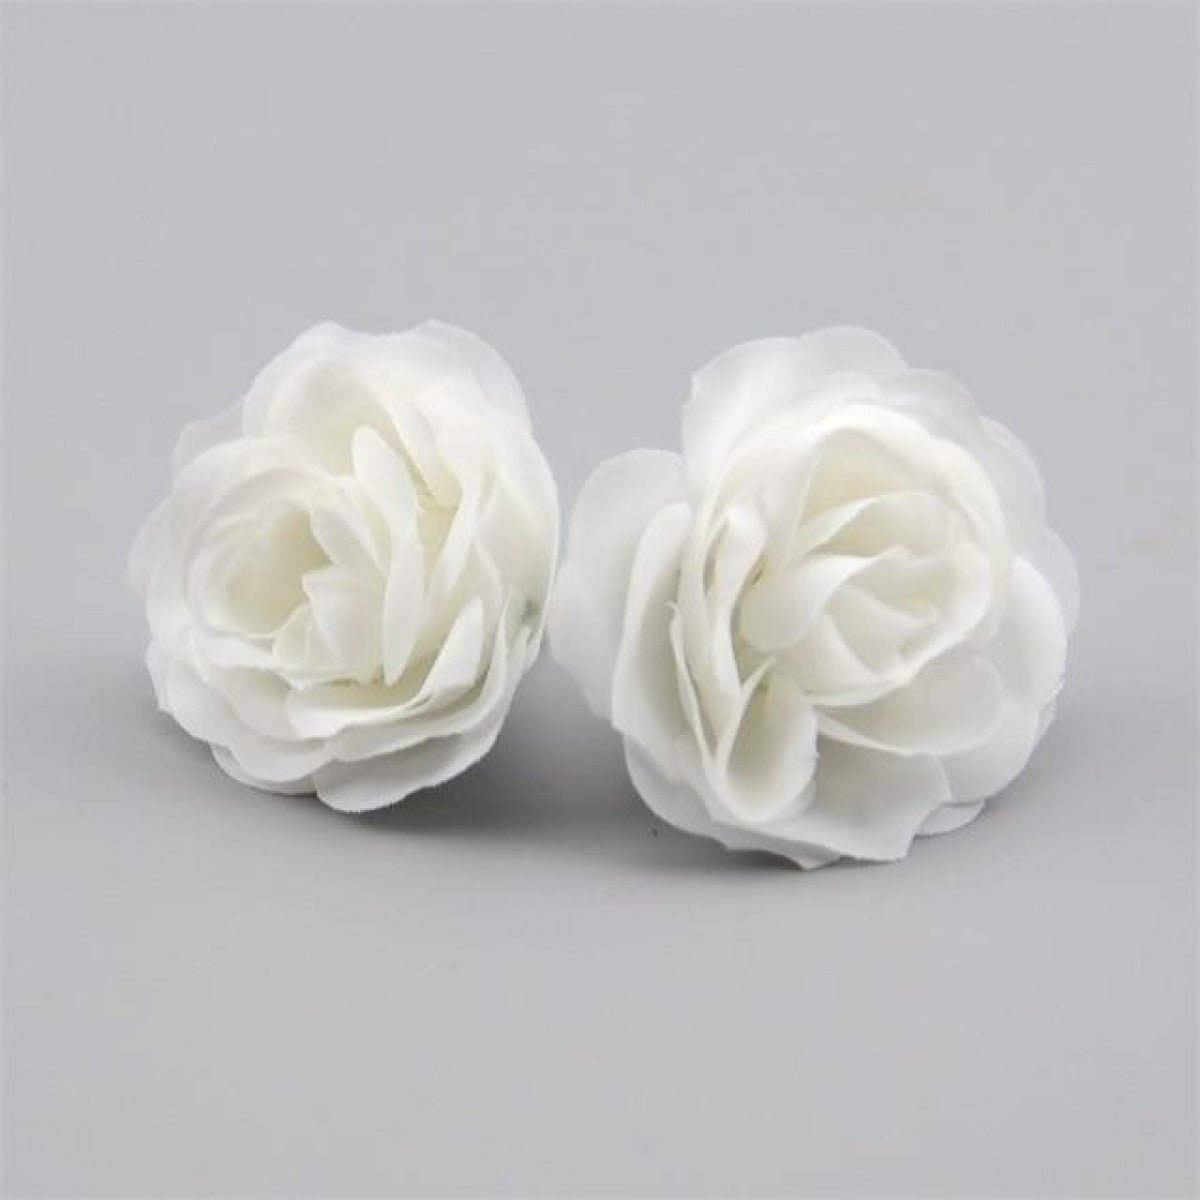 10pcs 2.5cm Mini Rose Cloth Artificial Flower For Wedding Party Home Decorations - White - - Asia Sell